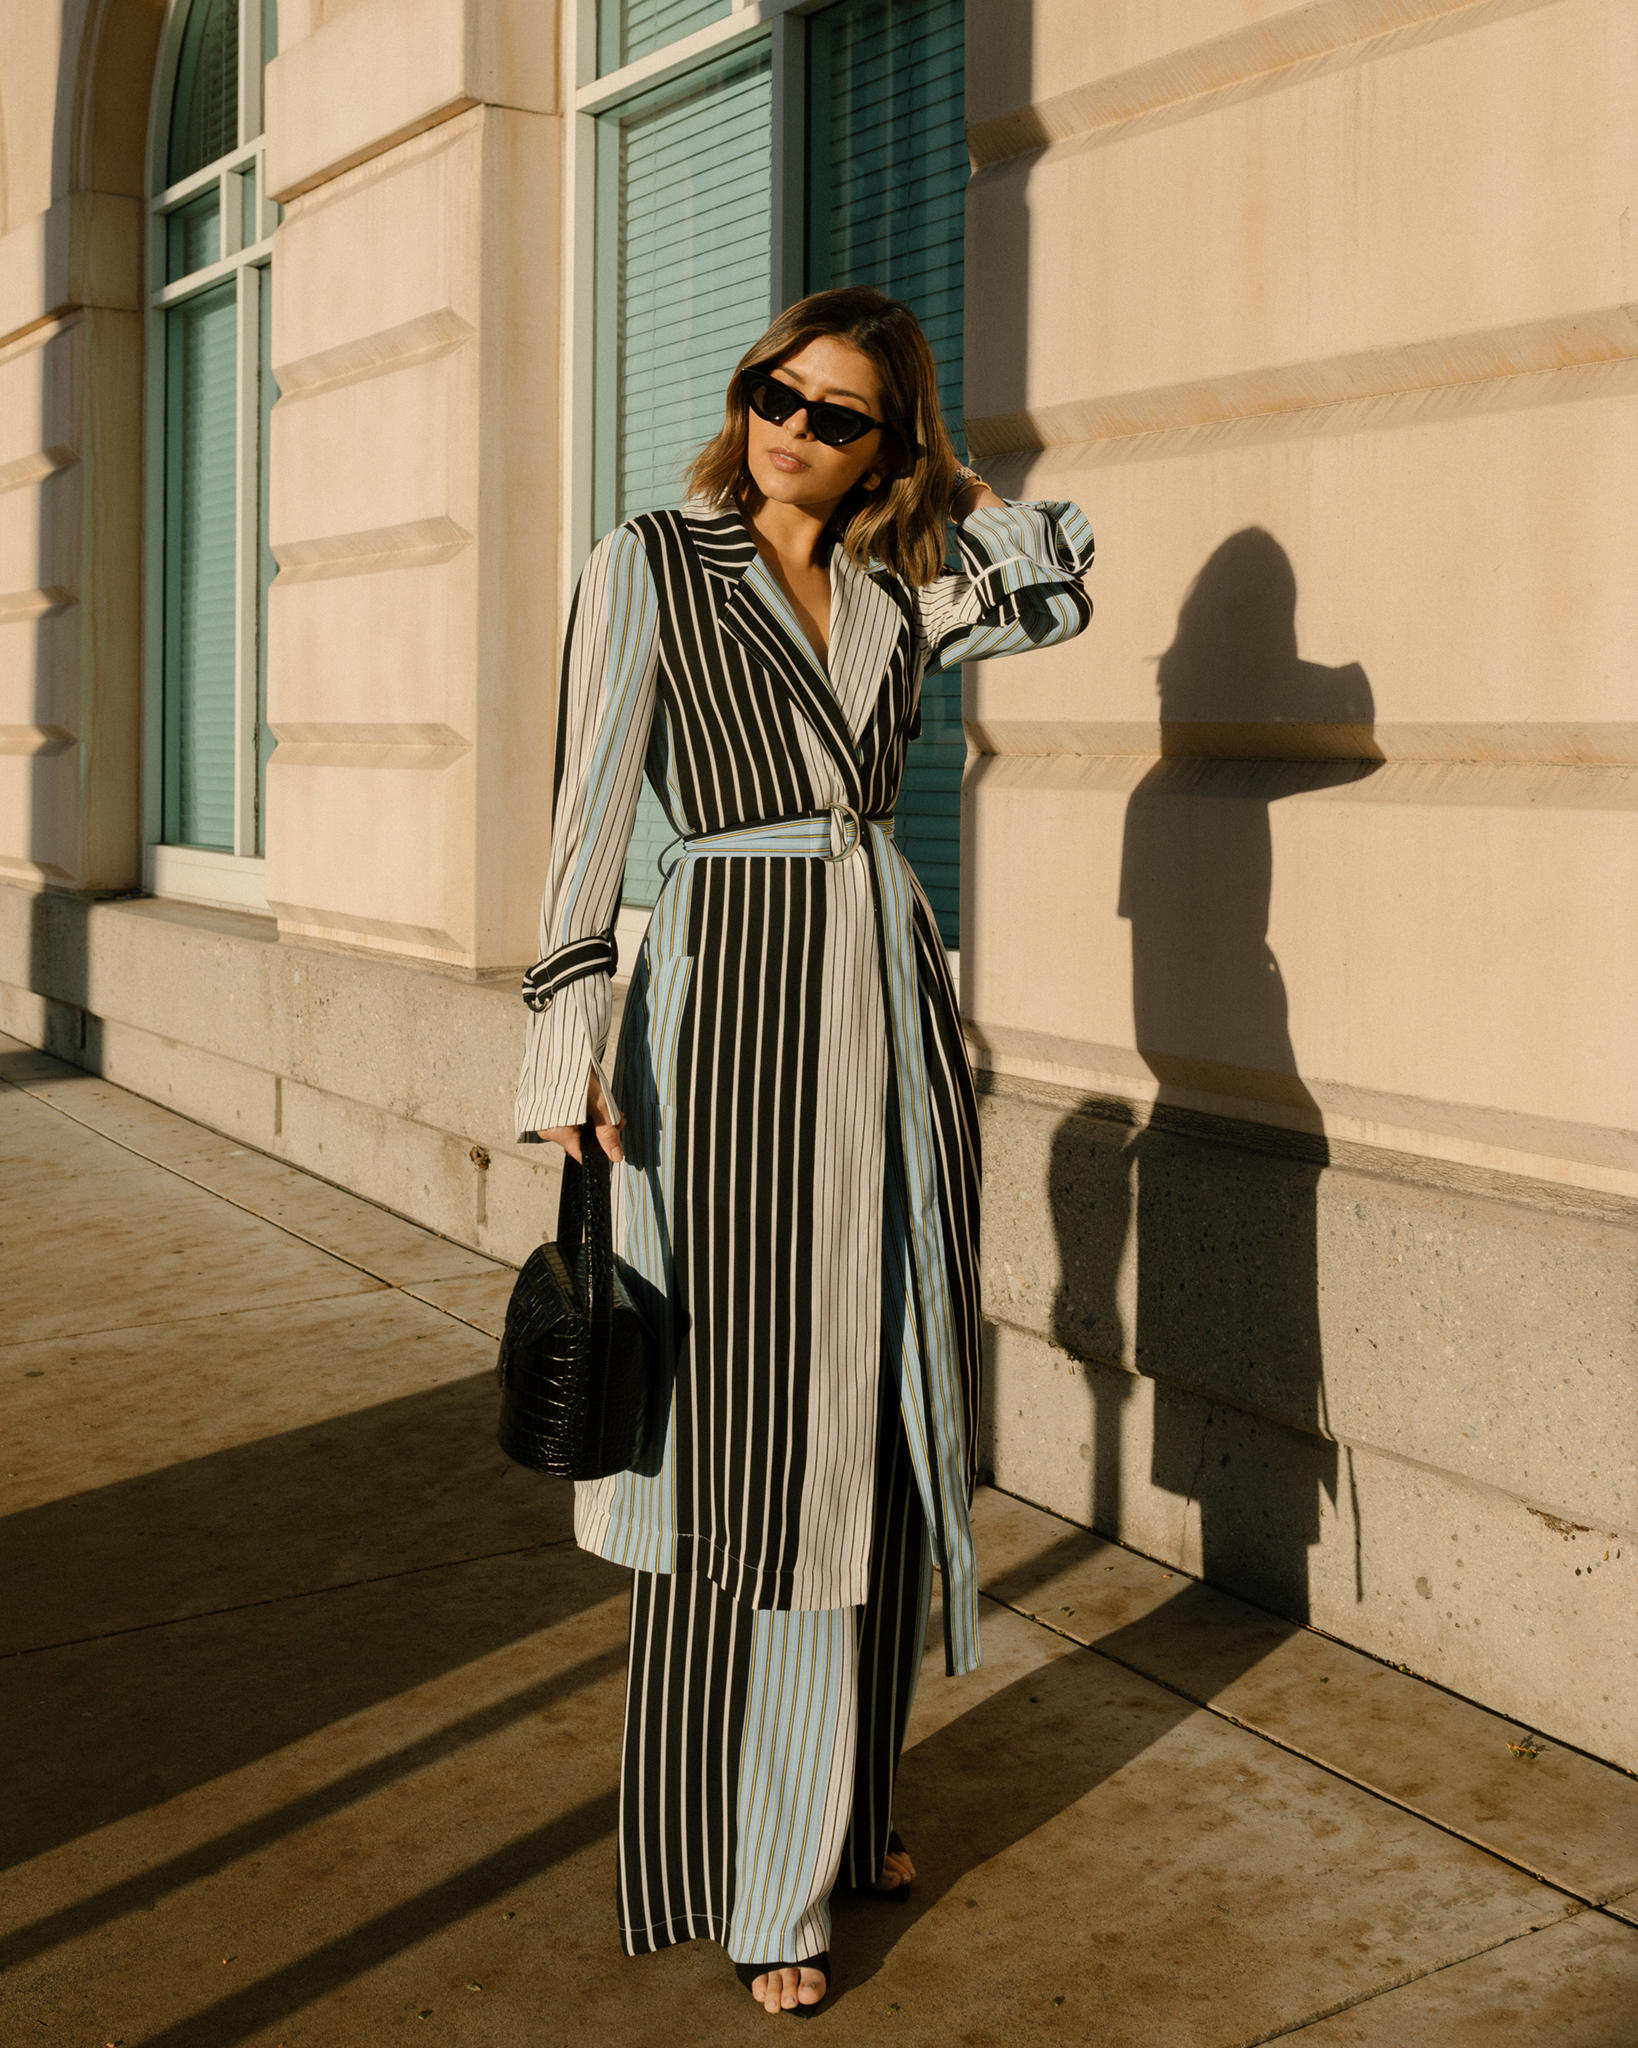 Pam Hetlinger wears BCBG Max Azria stripe set, chic spring outfit, best matching sets for a wardrobe refresh | thegirlfrompanama.com